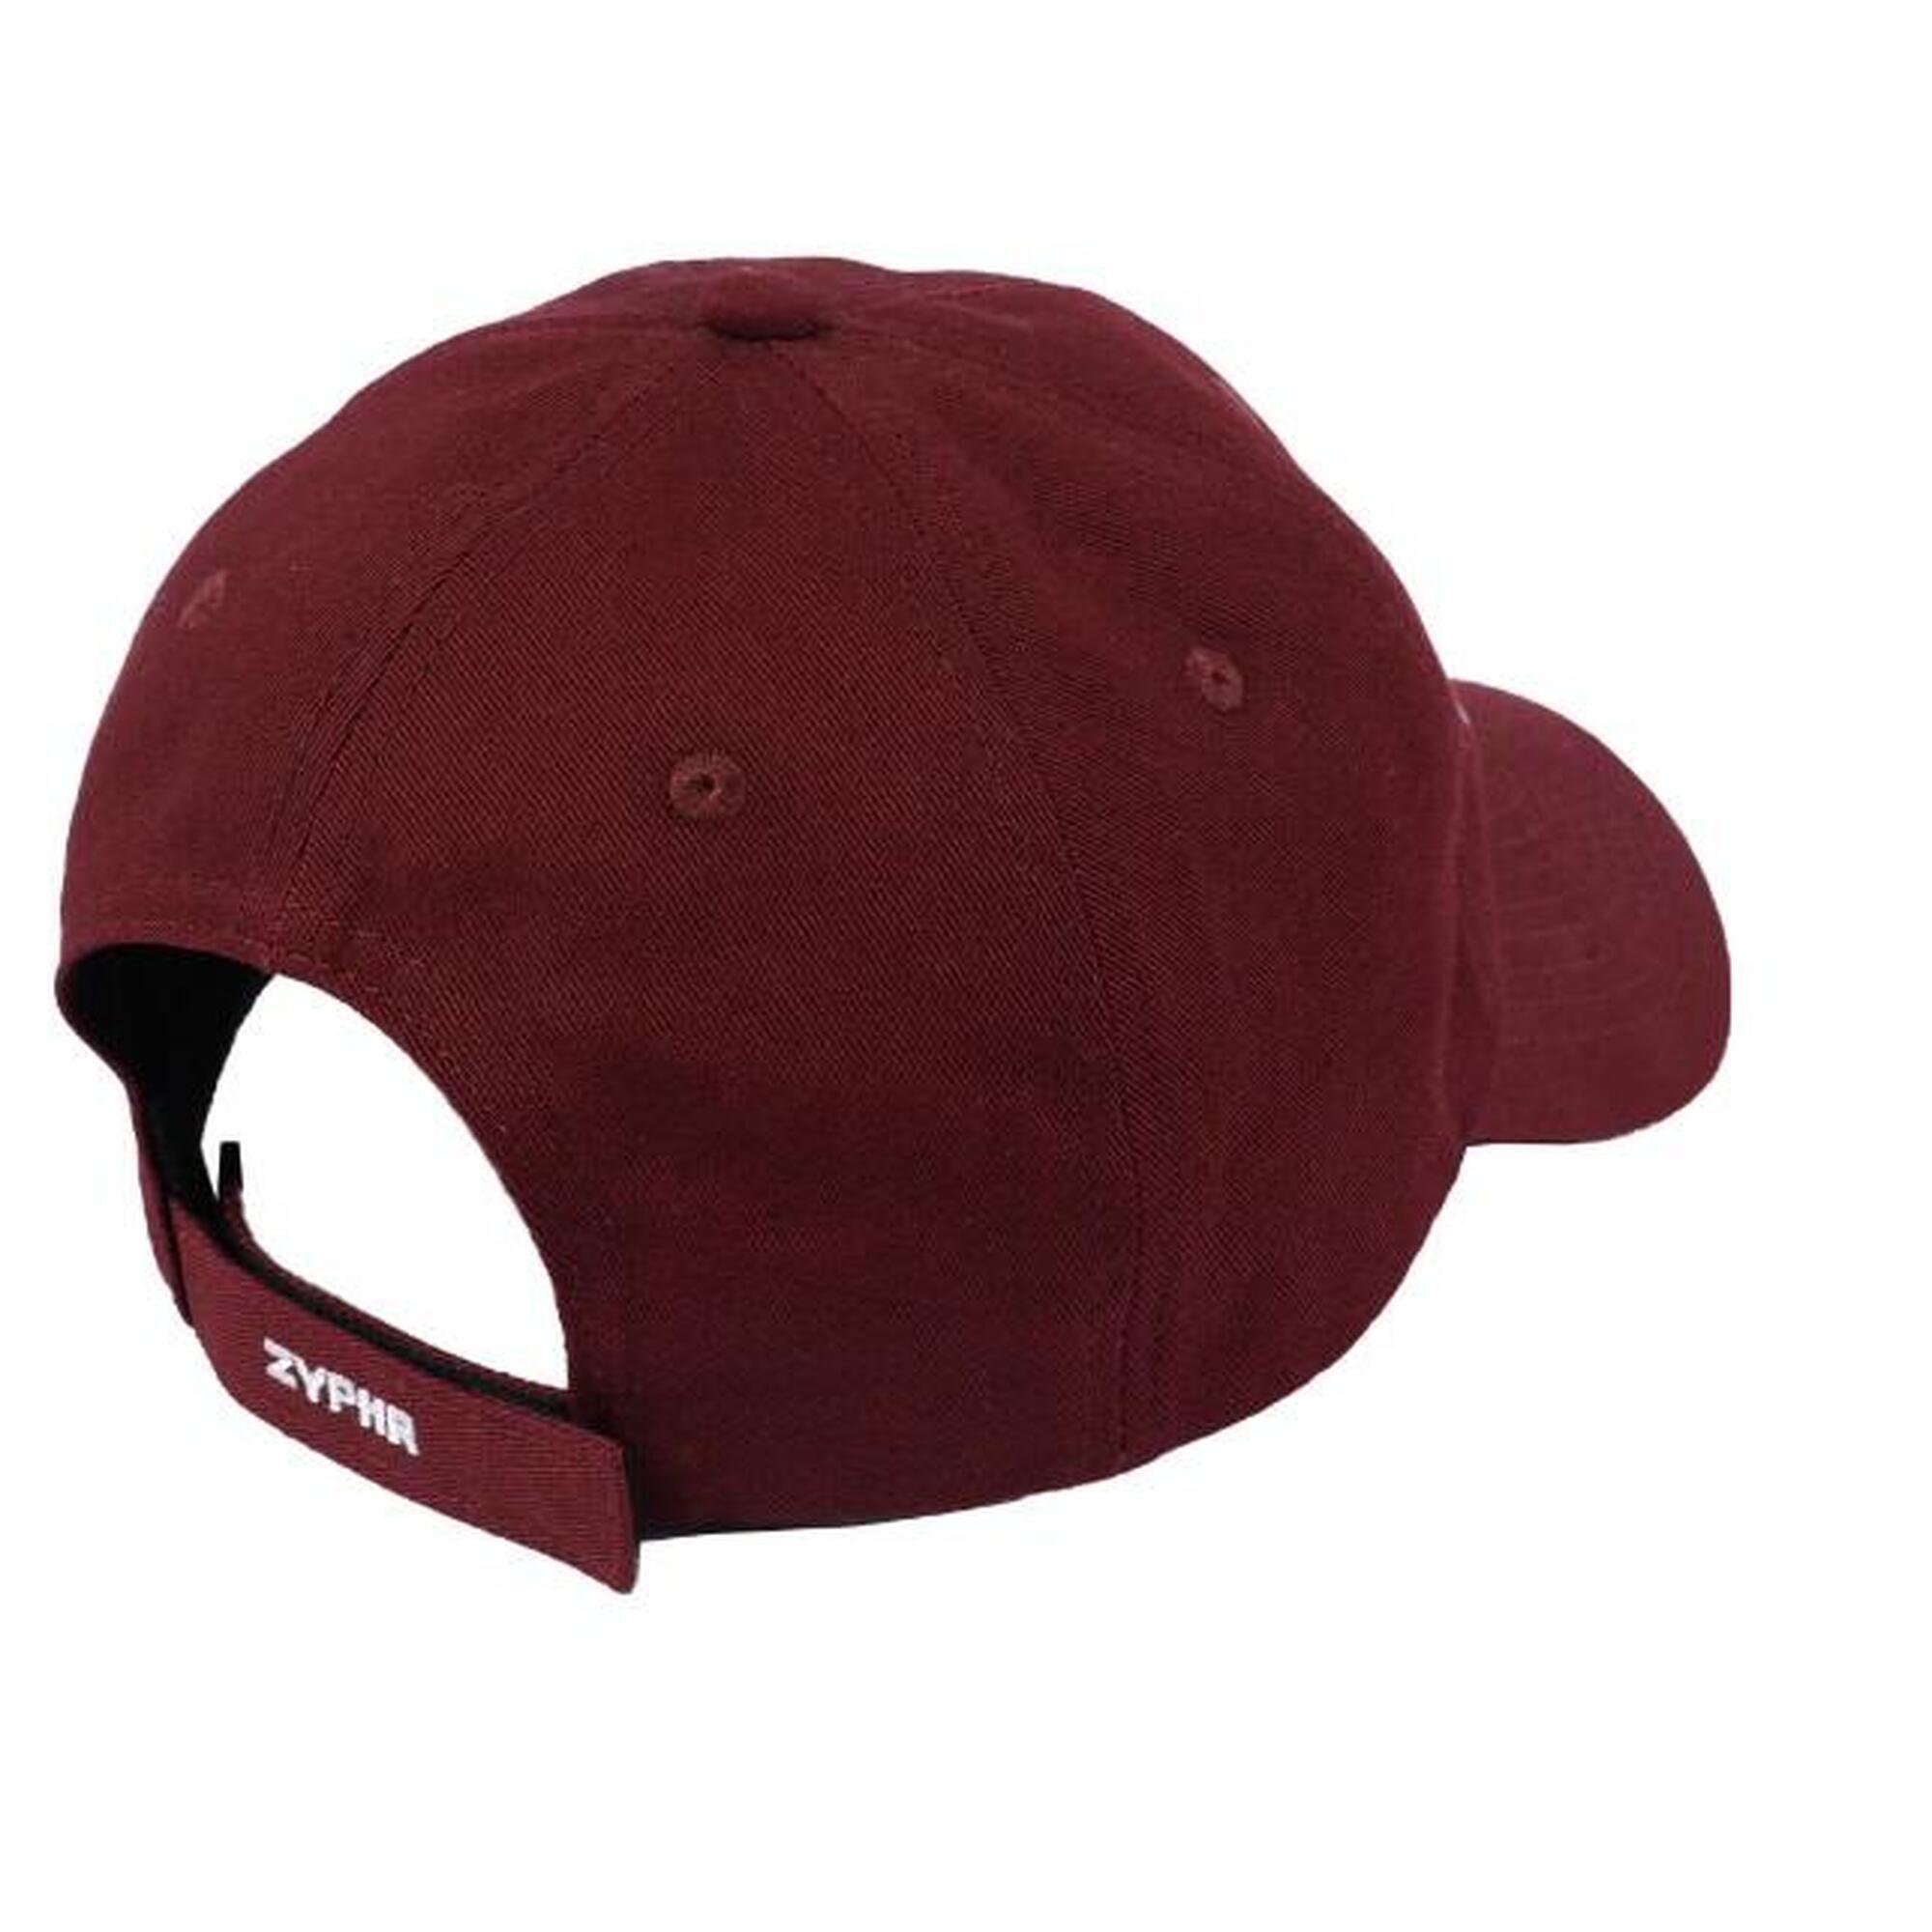 Dreamfearlessly Hiking Cap - Burgundy